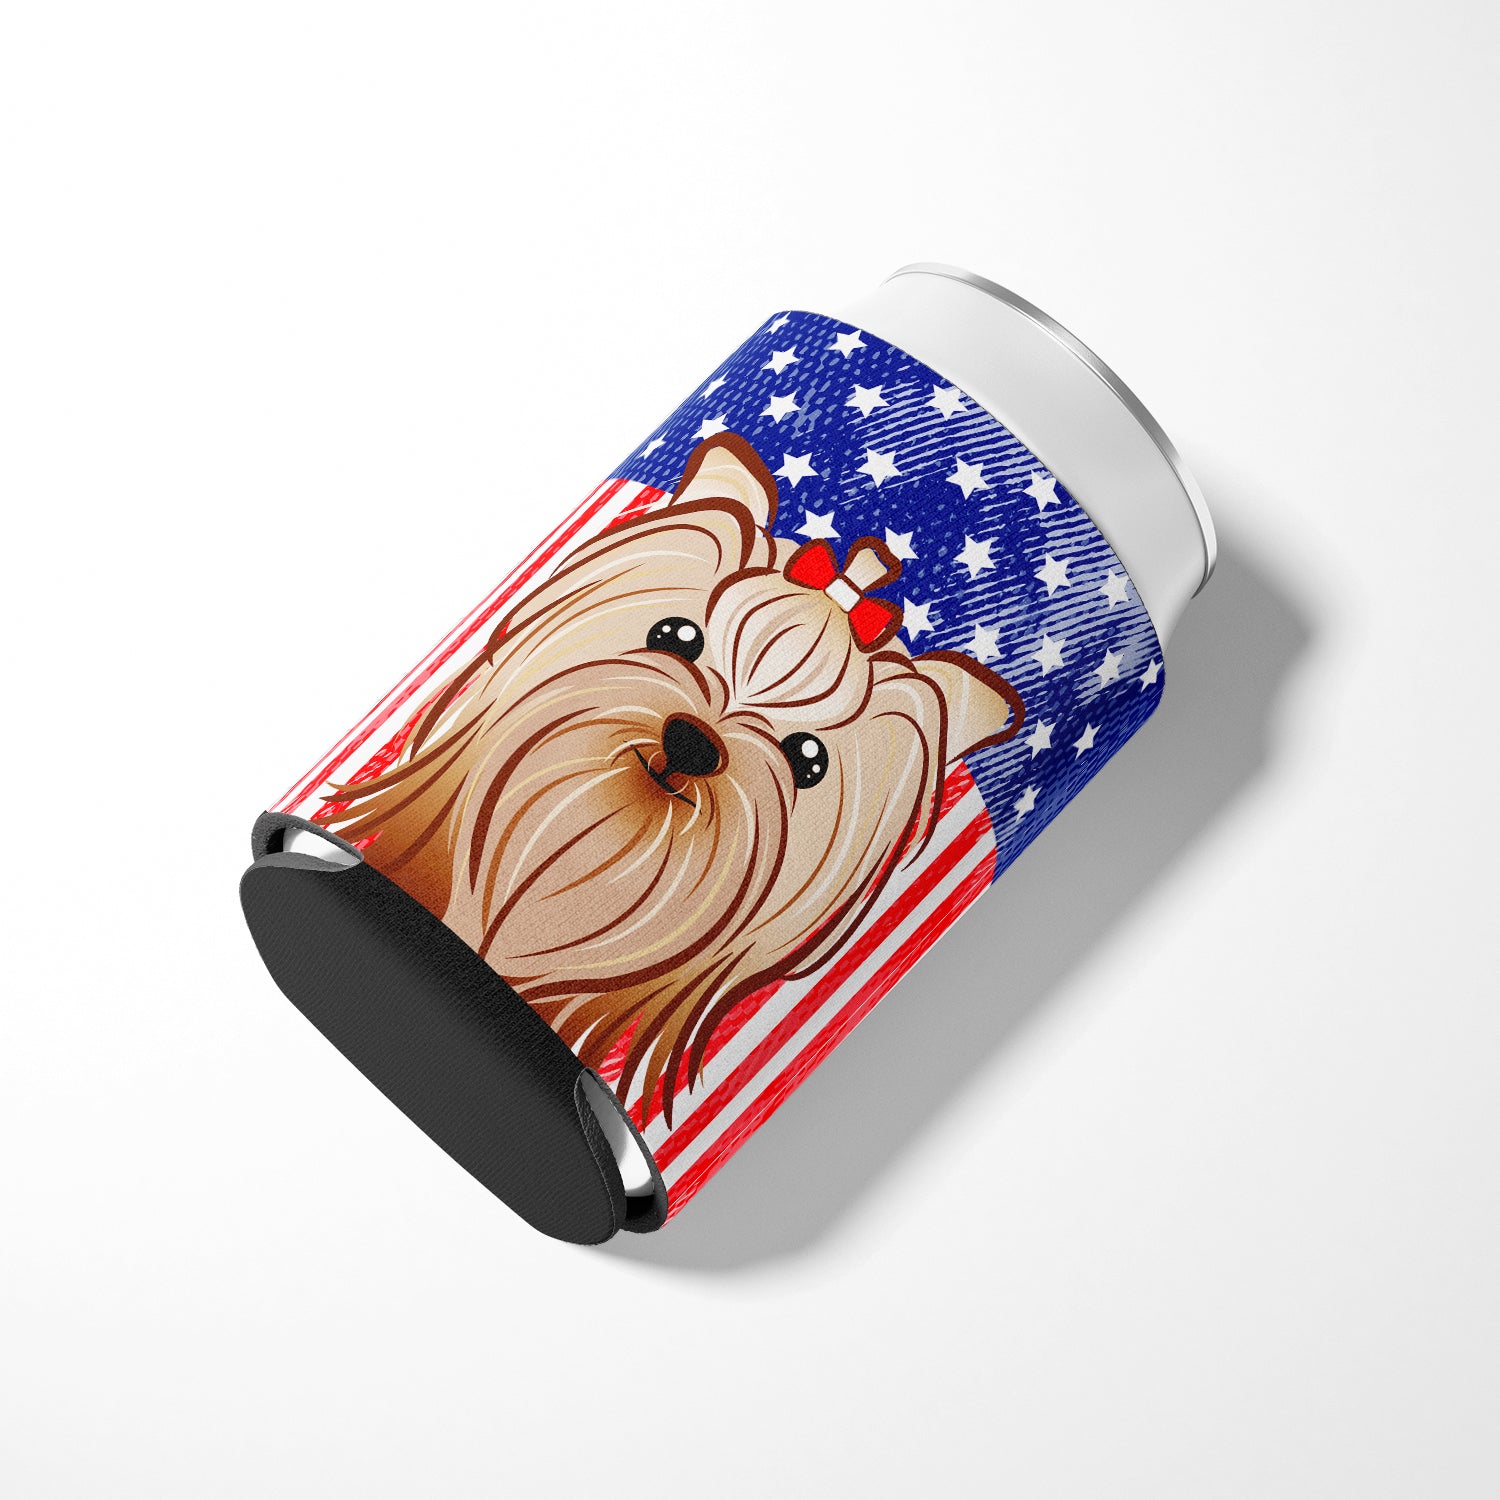 American Flag and Yorkie Yorkishire Terrier Can or Bottle Hugger BB2134CC